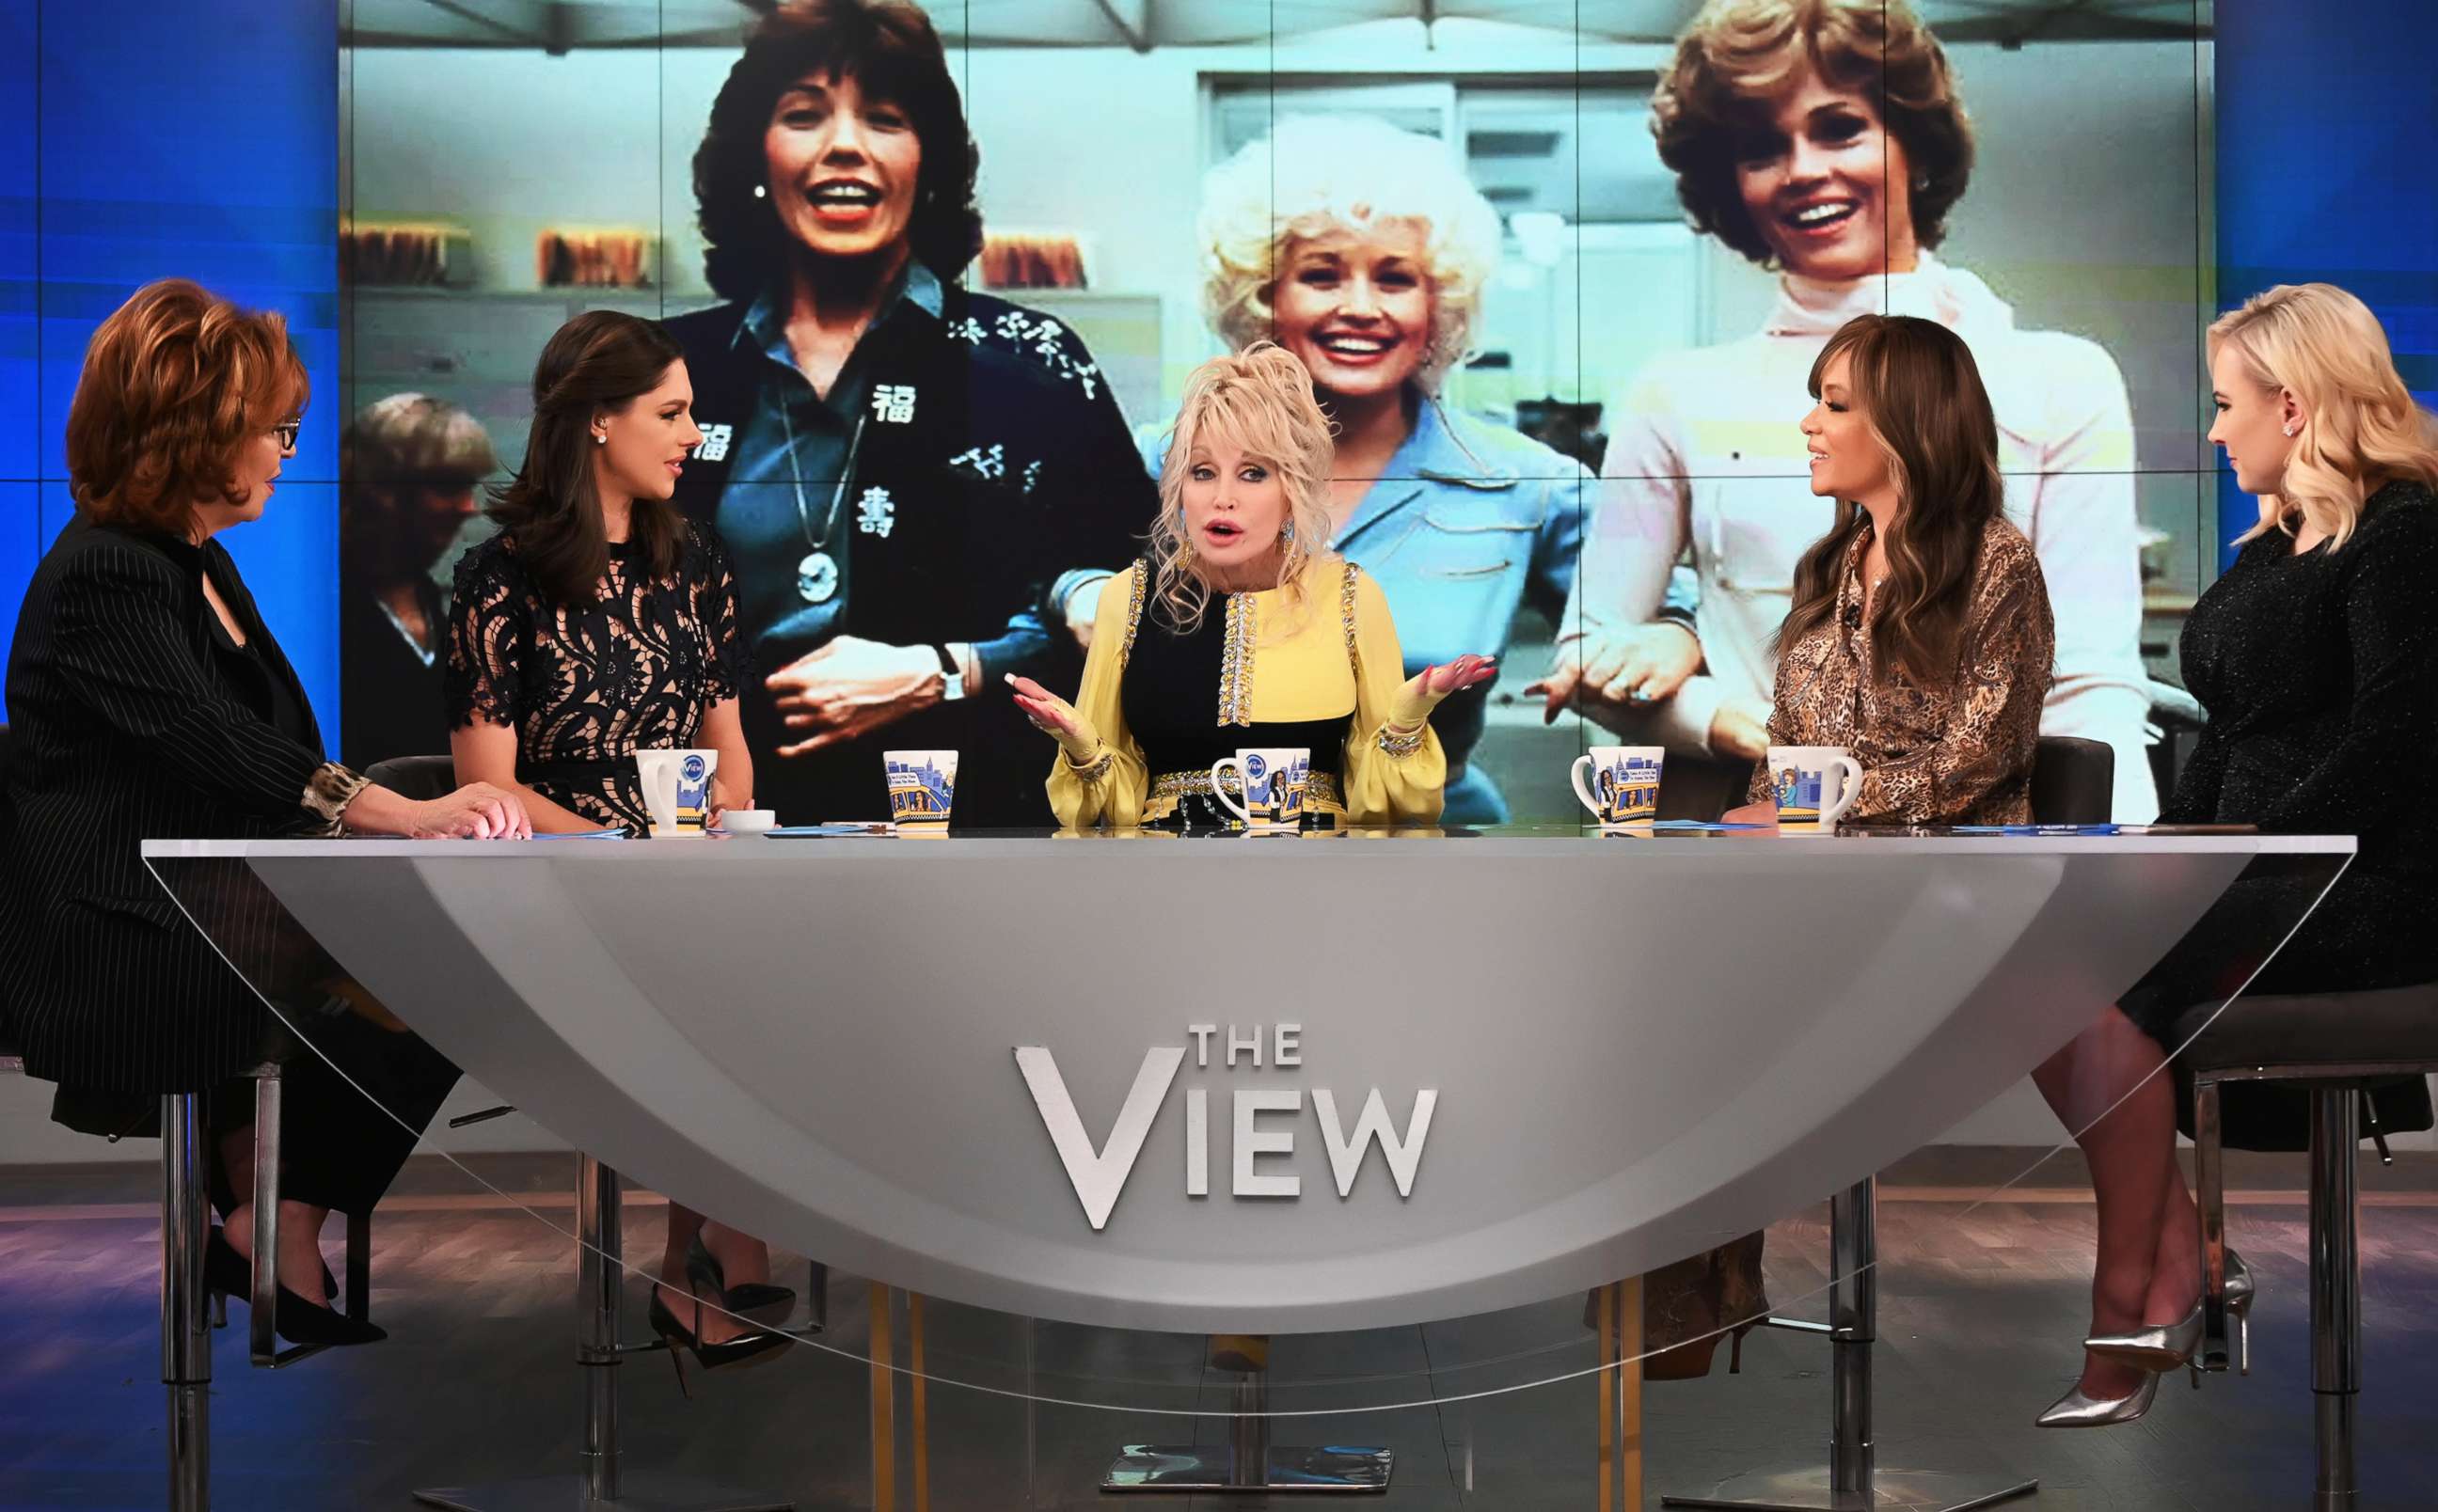 PHOTO: Dolly Parton joins "The View" co-hosts Joy Behar, Abby Huntsman, Sunny Hostin, and Meghan McCain to discuss her new series "Heartstrings" on Nov. 22, 2019.